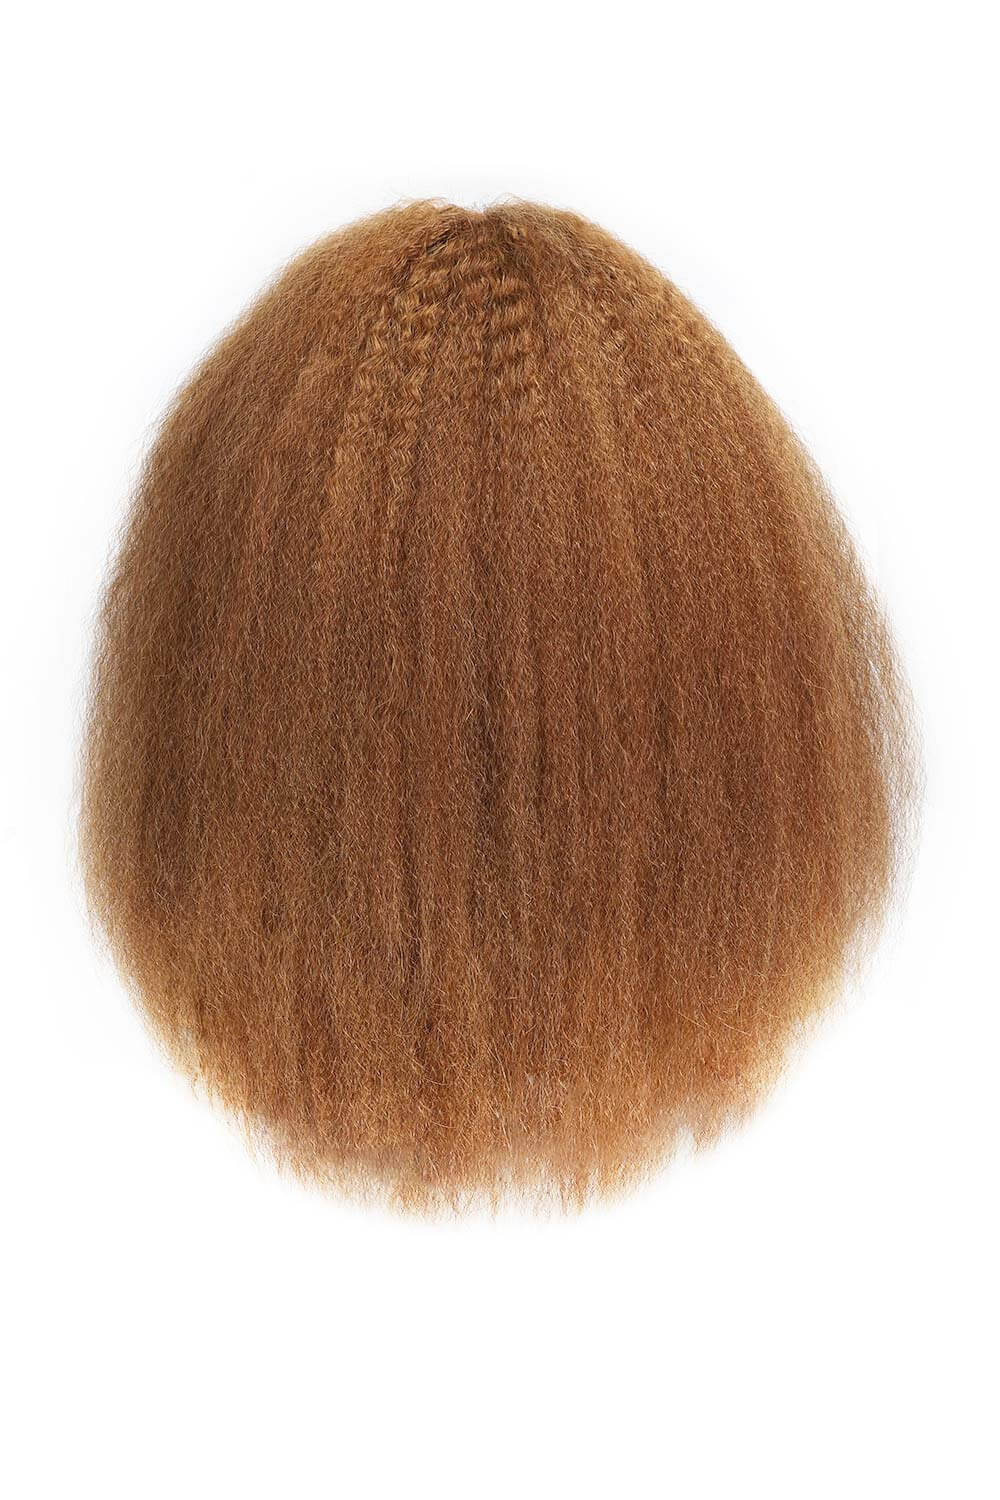 t-part-lace-wig-ginger-brown-afro-kinky-straight-yaki-human-hair-3